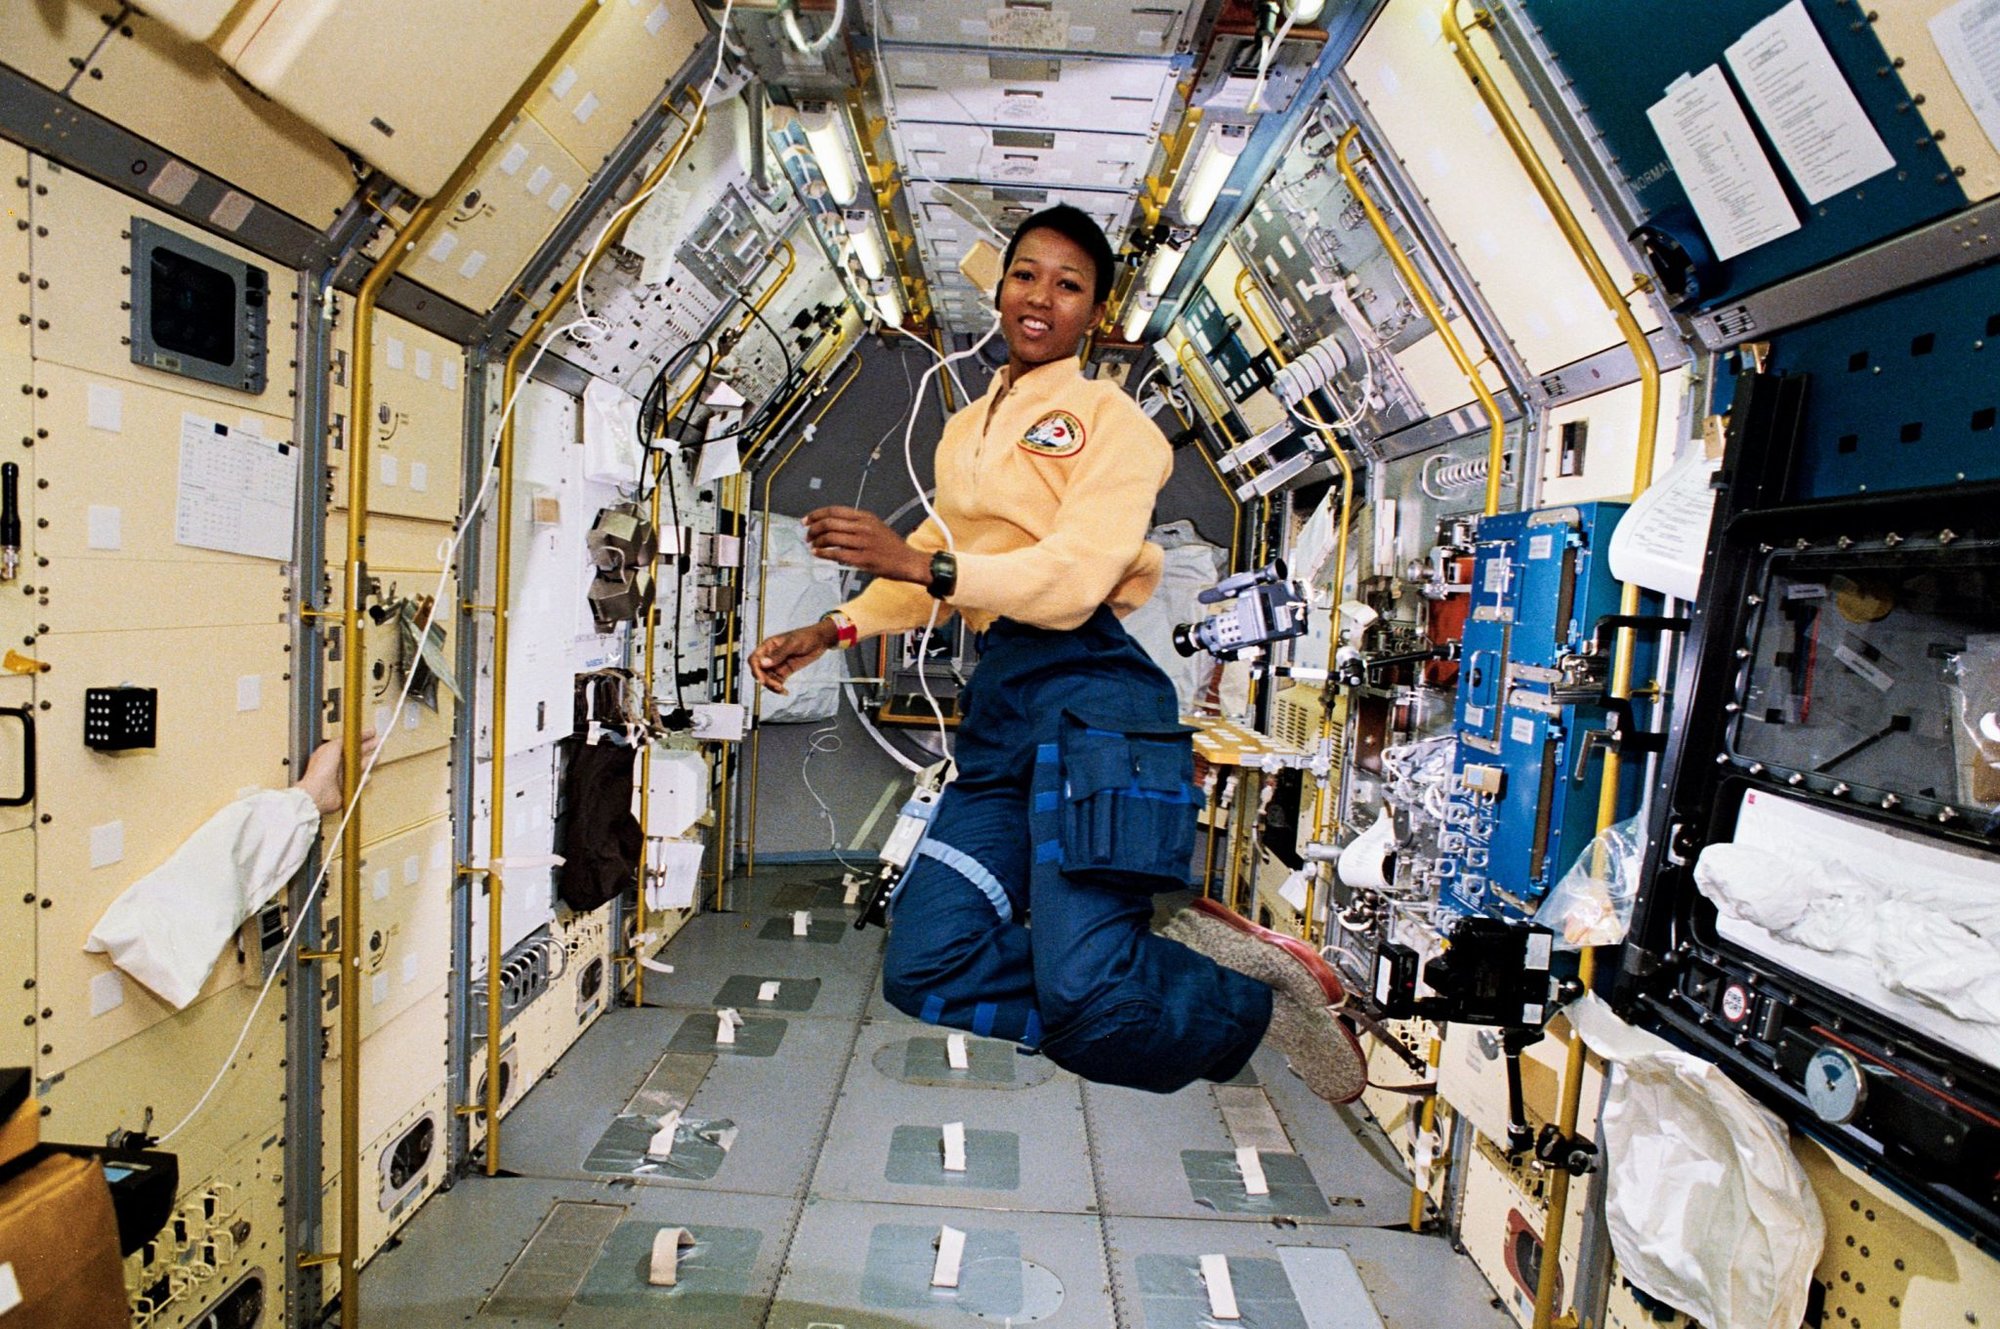 Jemison aboard the Spacelab Japan module on Endeavour. Photo courtesy of Wikimedia Commons.